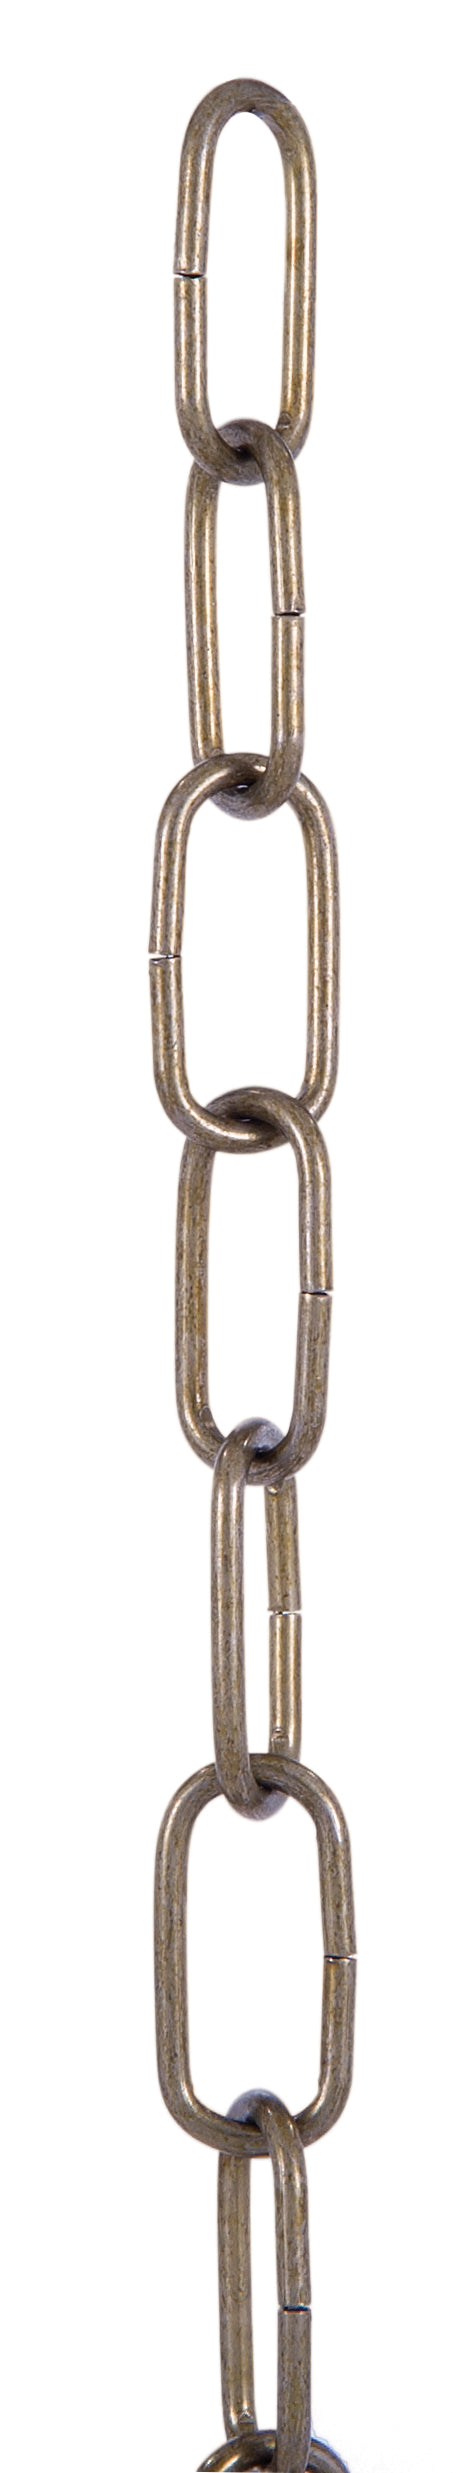 Antique Brass Finish, 10 Gauge Straight Sided Oval Steel Chain